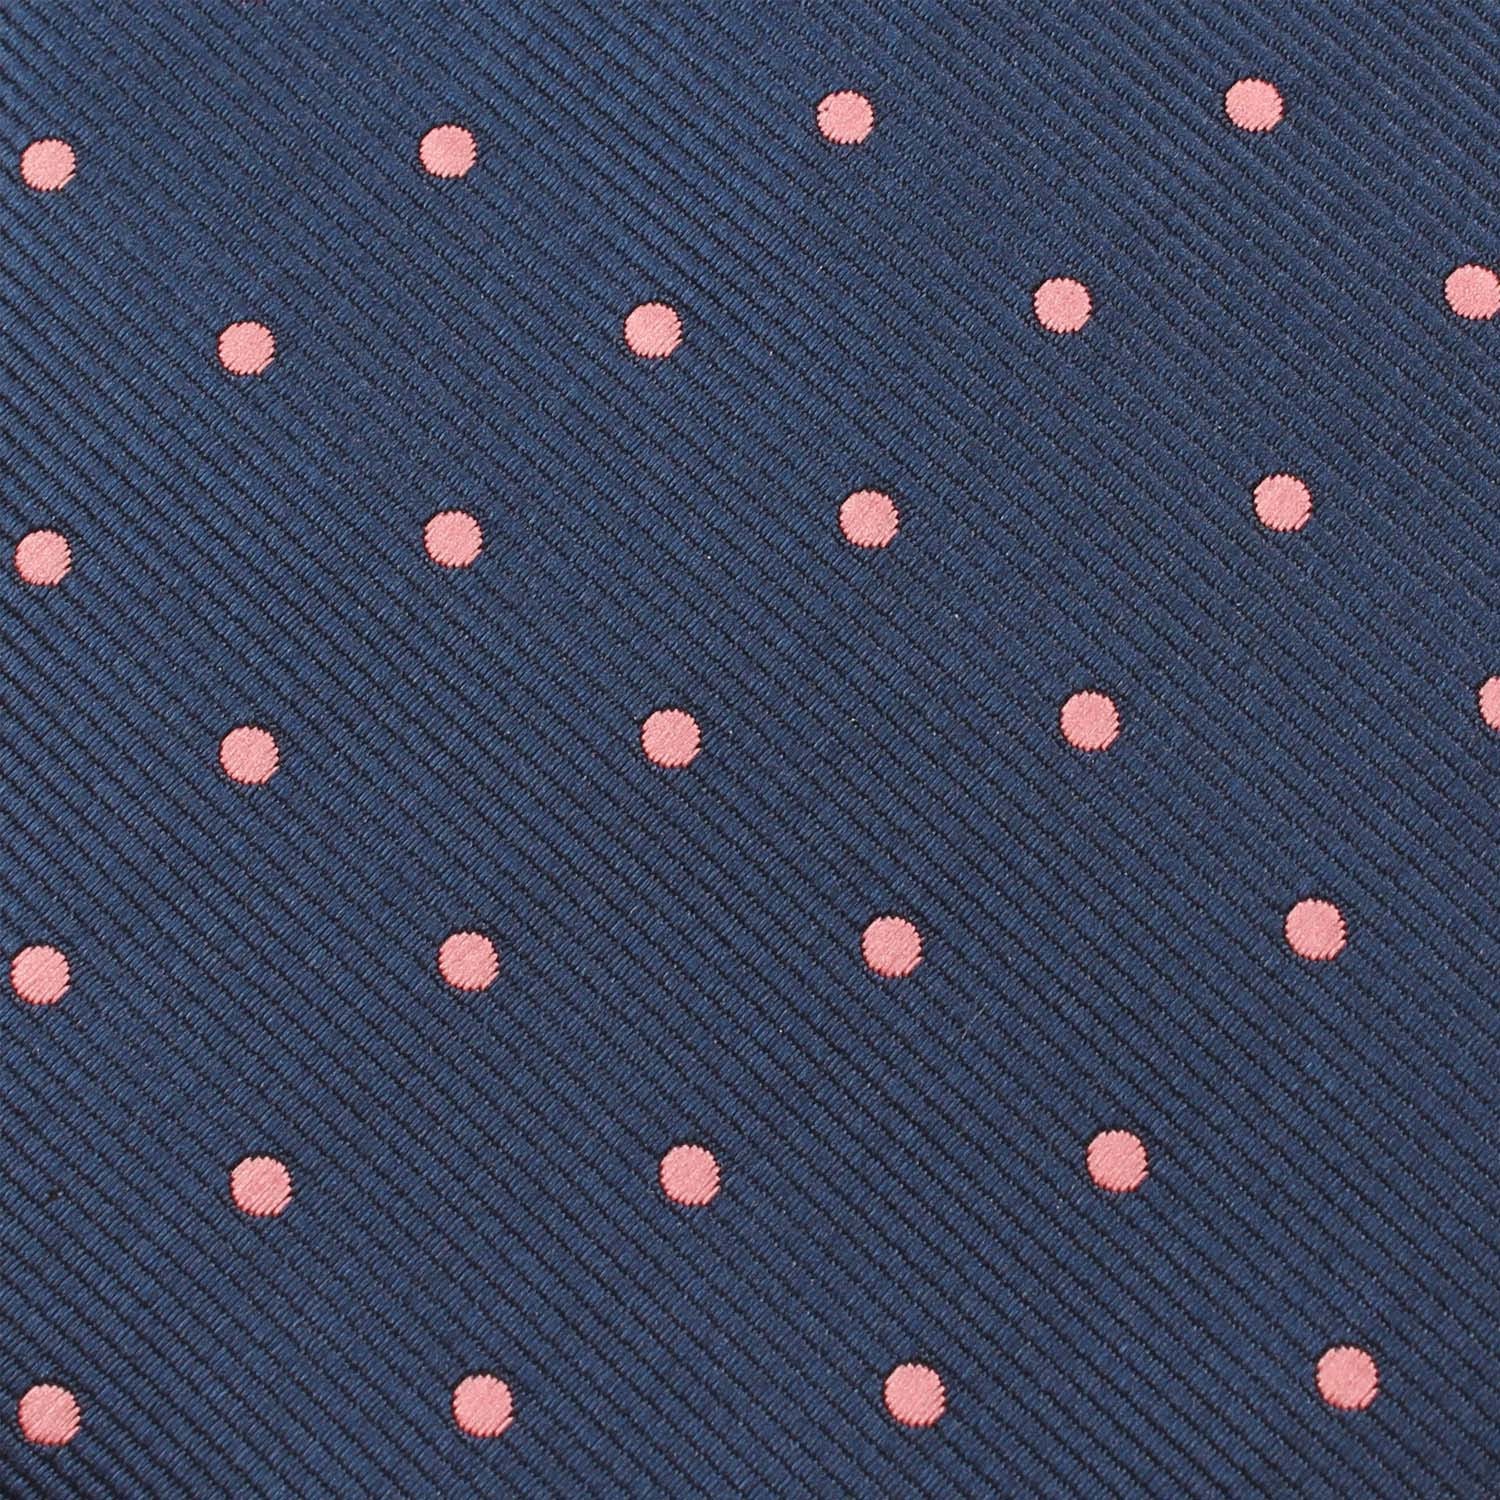 Navy Blue with Pink Polka Dots Fabric Necktie X004